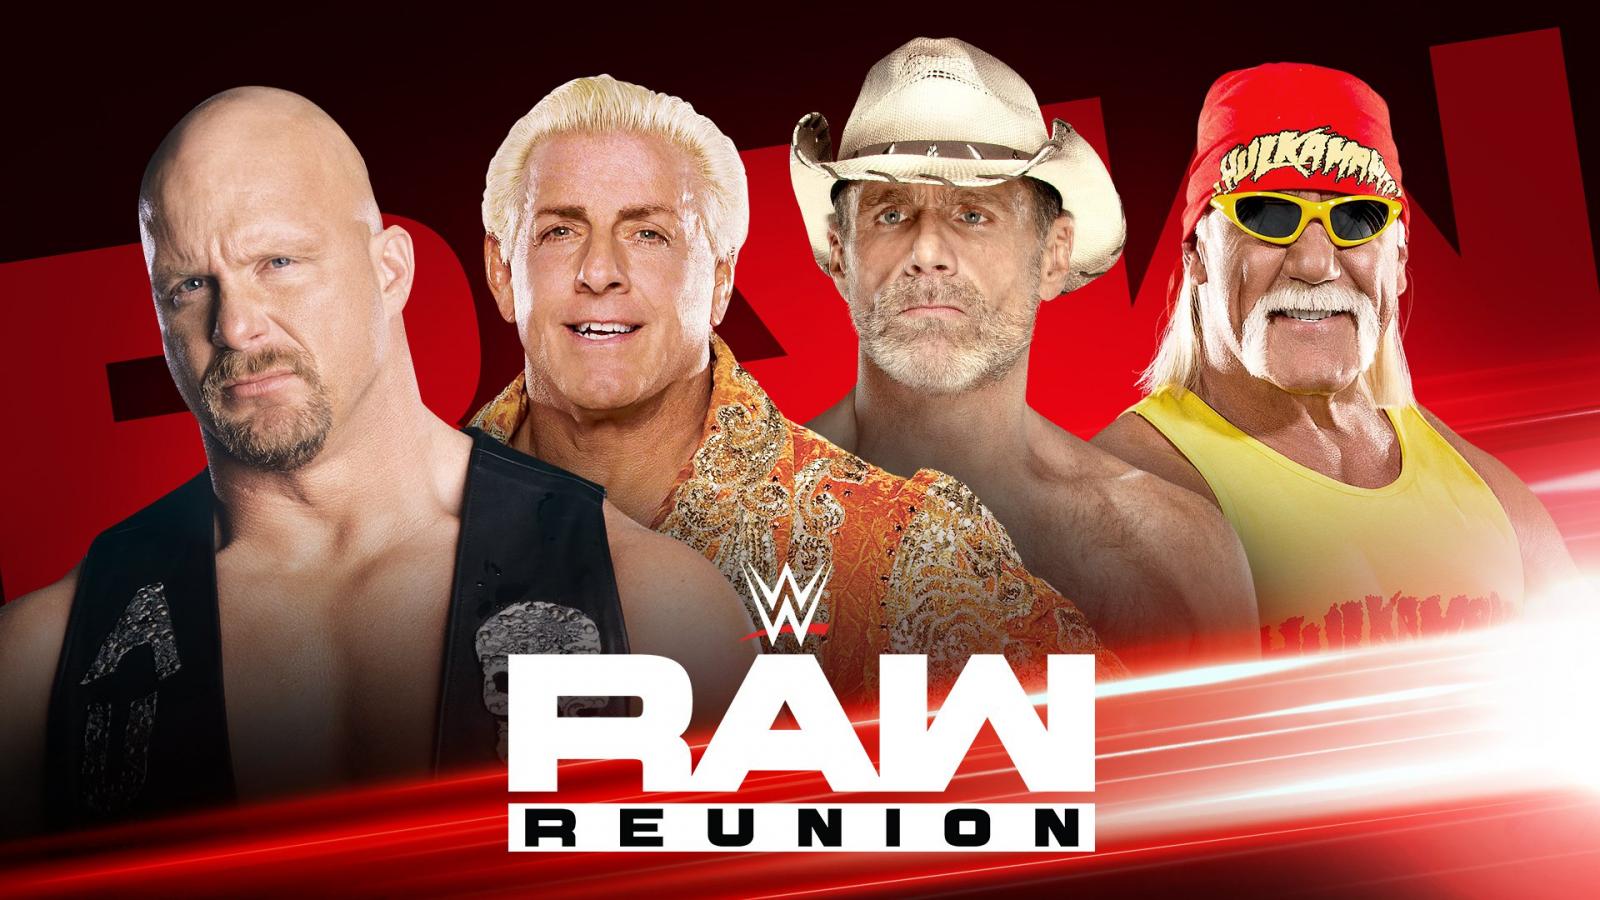 WWE Raw Reunion Live Stream Watch Online Ric Flair Stone Cold